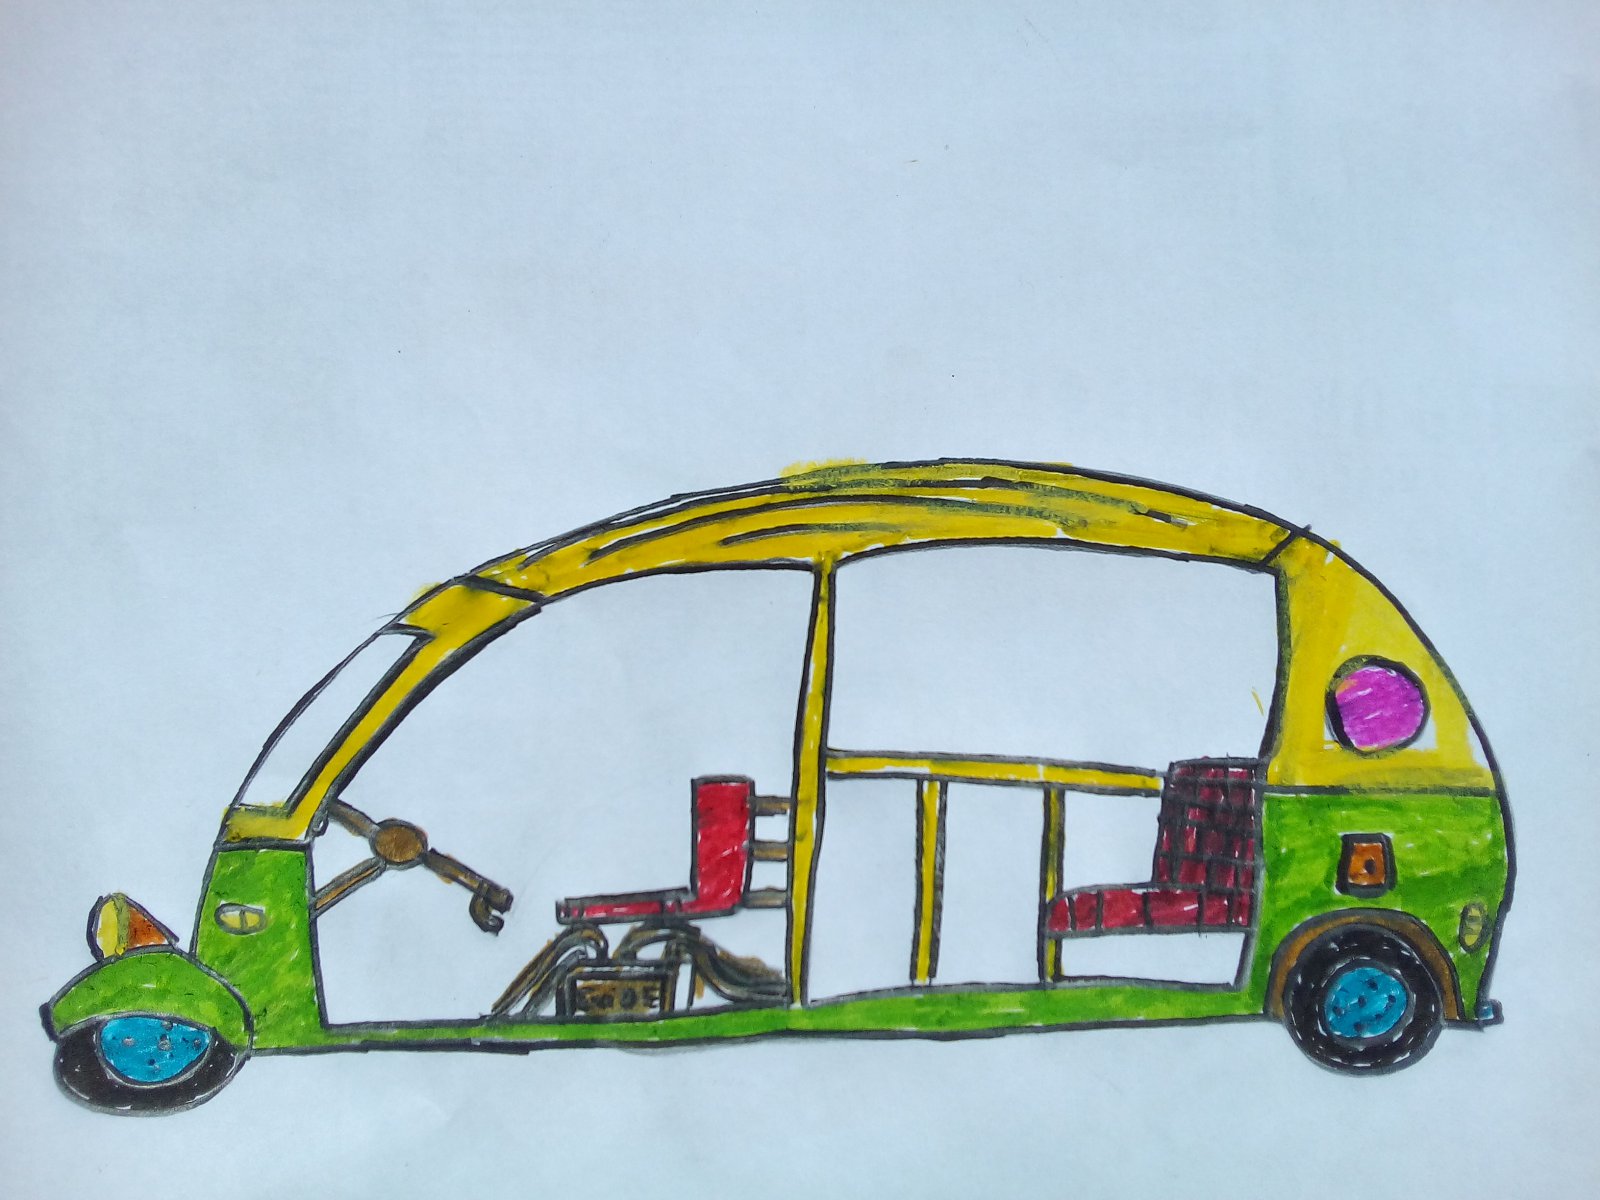 AUTO RIKSHA ( THE VEHICLE USED BY COMMON MAN TRANSPORT IN KERALA STATE IN INDIA) THEME_ MY DESIGNED VEHICLES> - JOHN ( JOHN ART Gallery 2019).